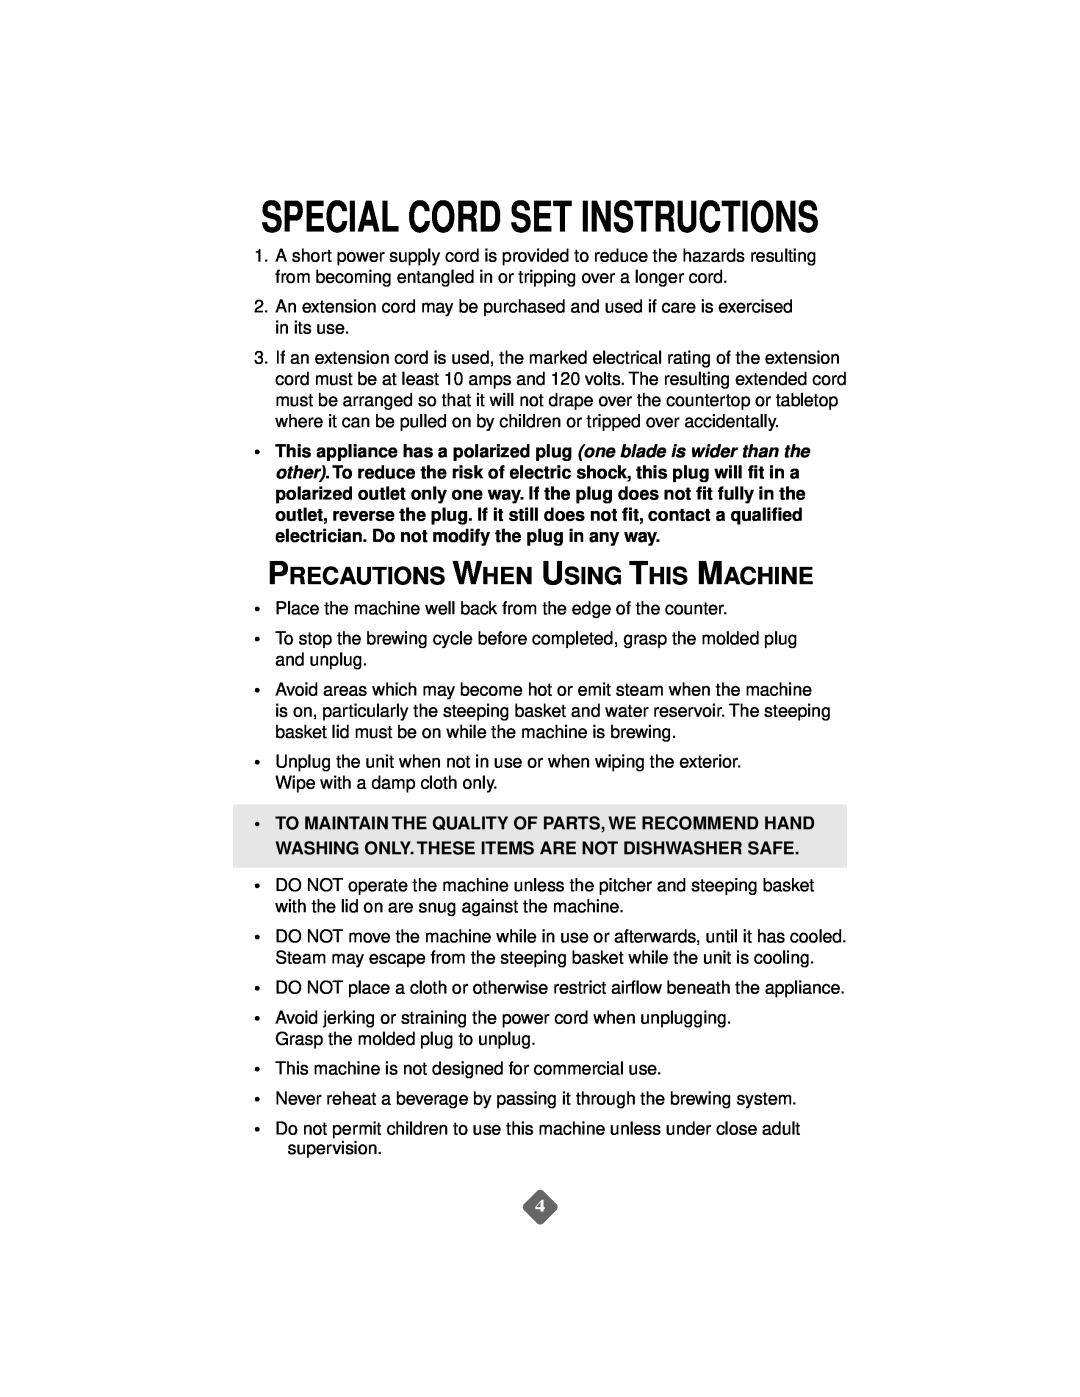 Mr. Coffee TM1 instruction manual Precautions When Using This Machine, Special Cord Set Instructions 